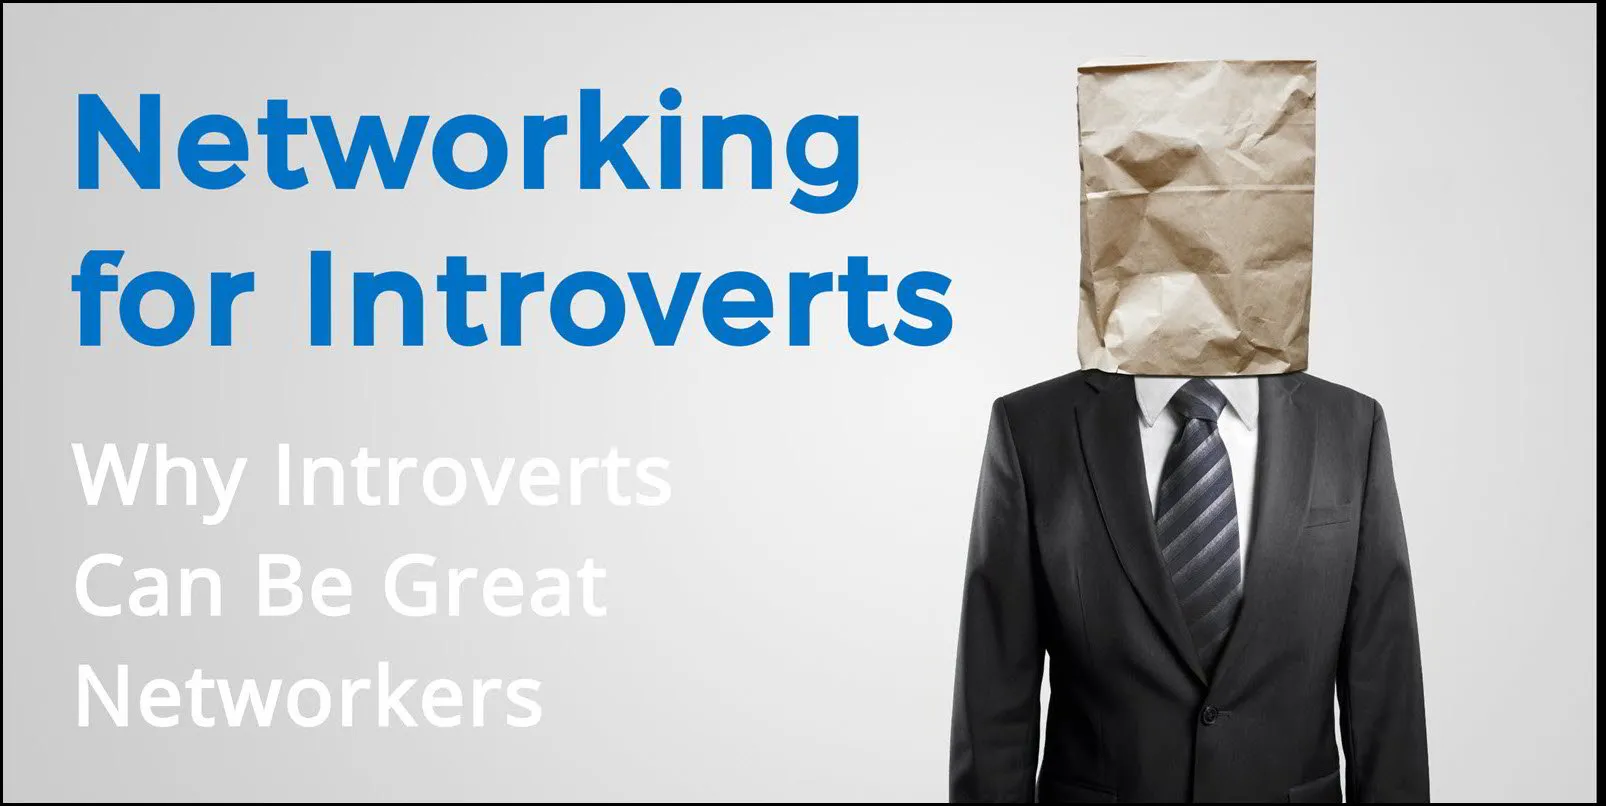 How to Network as an Introvert